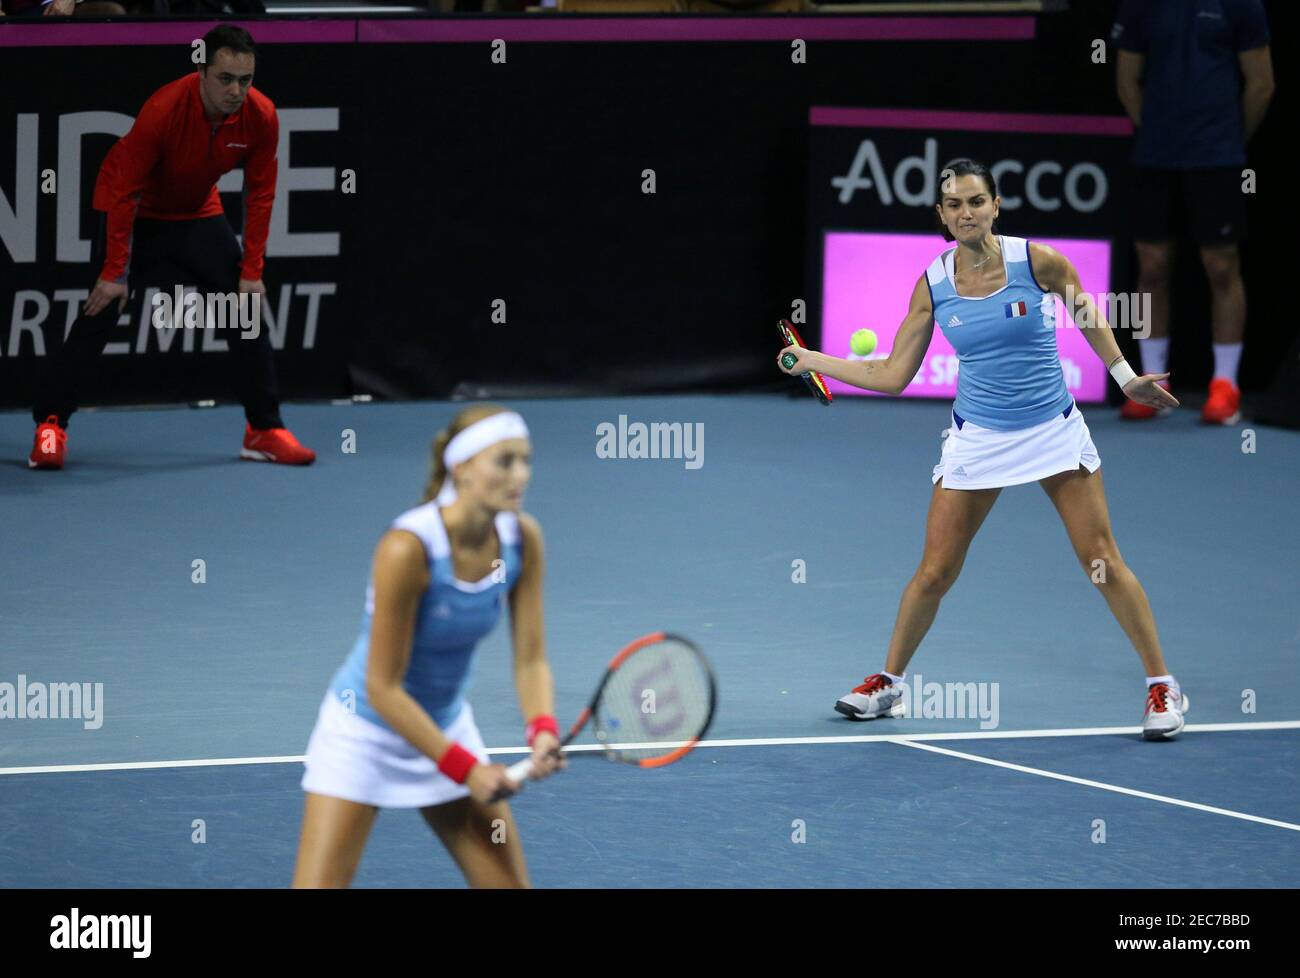 Tennis - Fed Cup World Group First Round - France vs Belgium - Vendespace,  La Roche-sur-Yon, France - February 11, 2018 France's Amandine Hesse in  action during her doubles match with Kristina